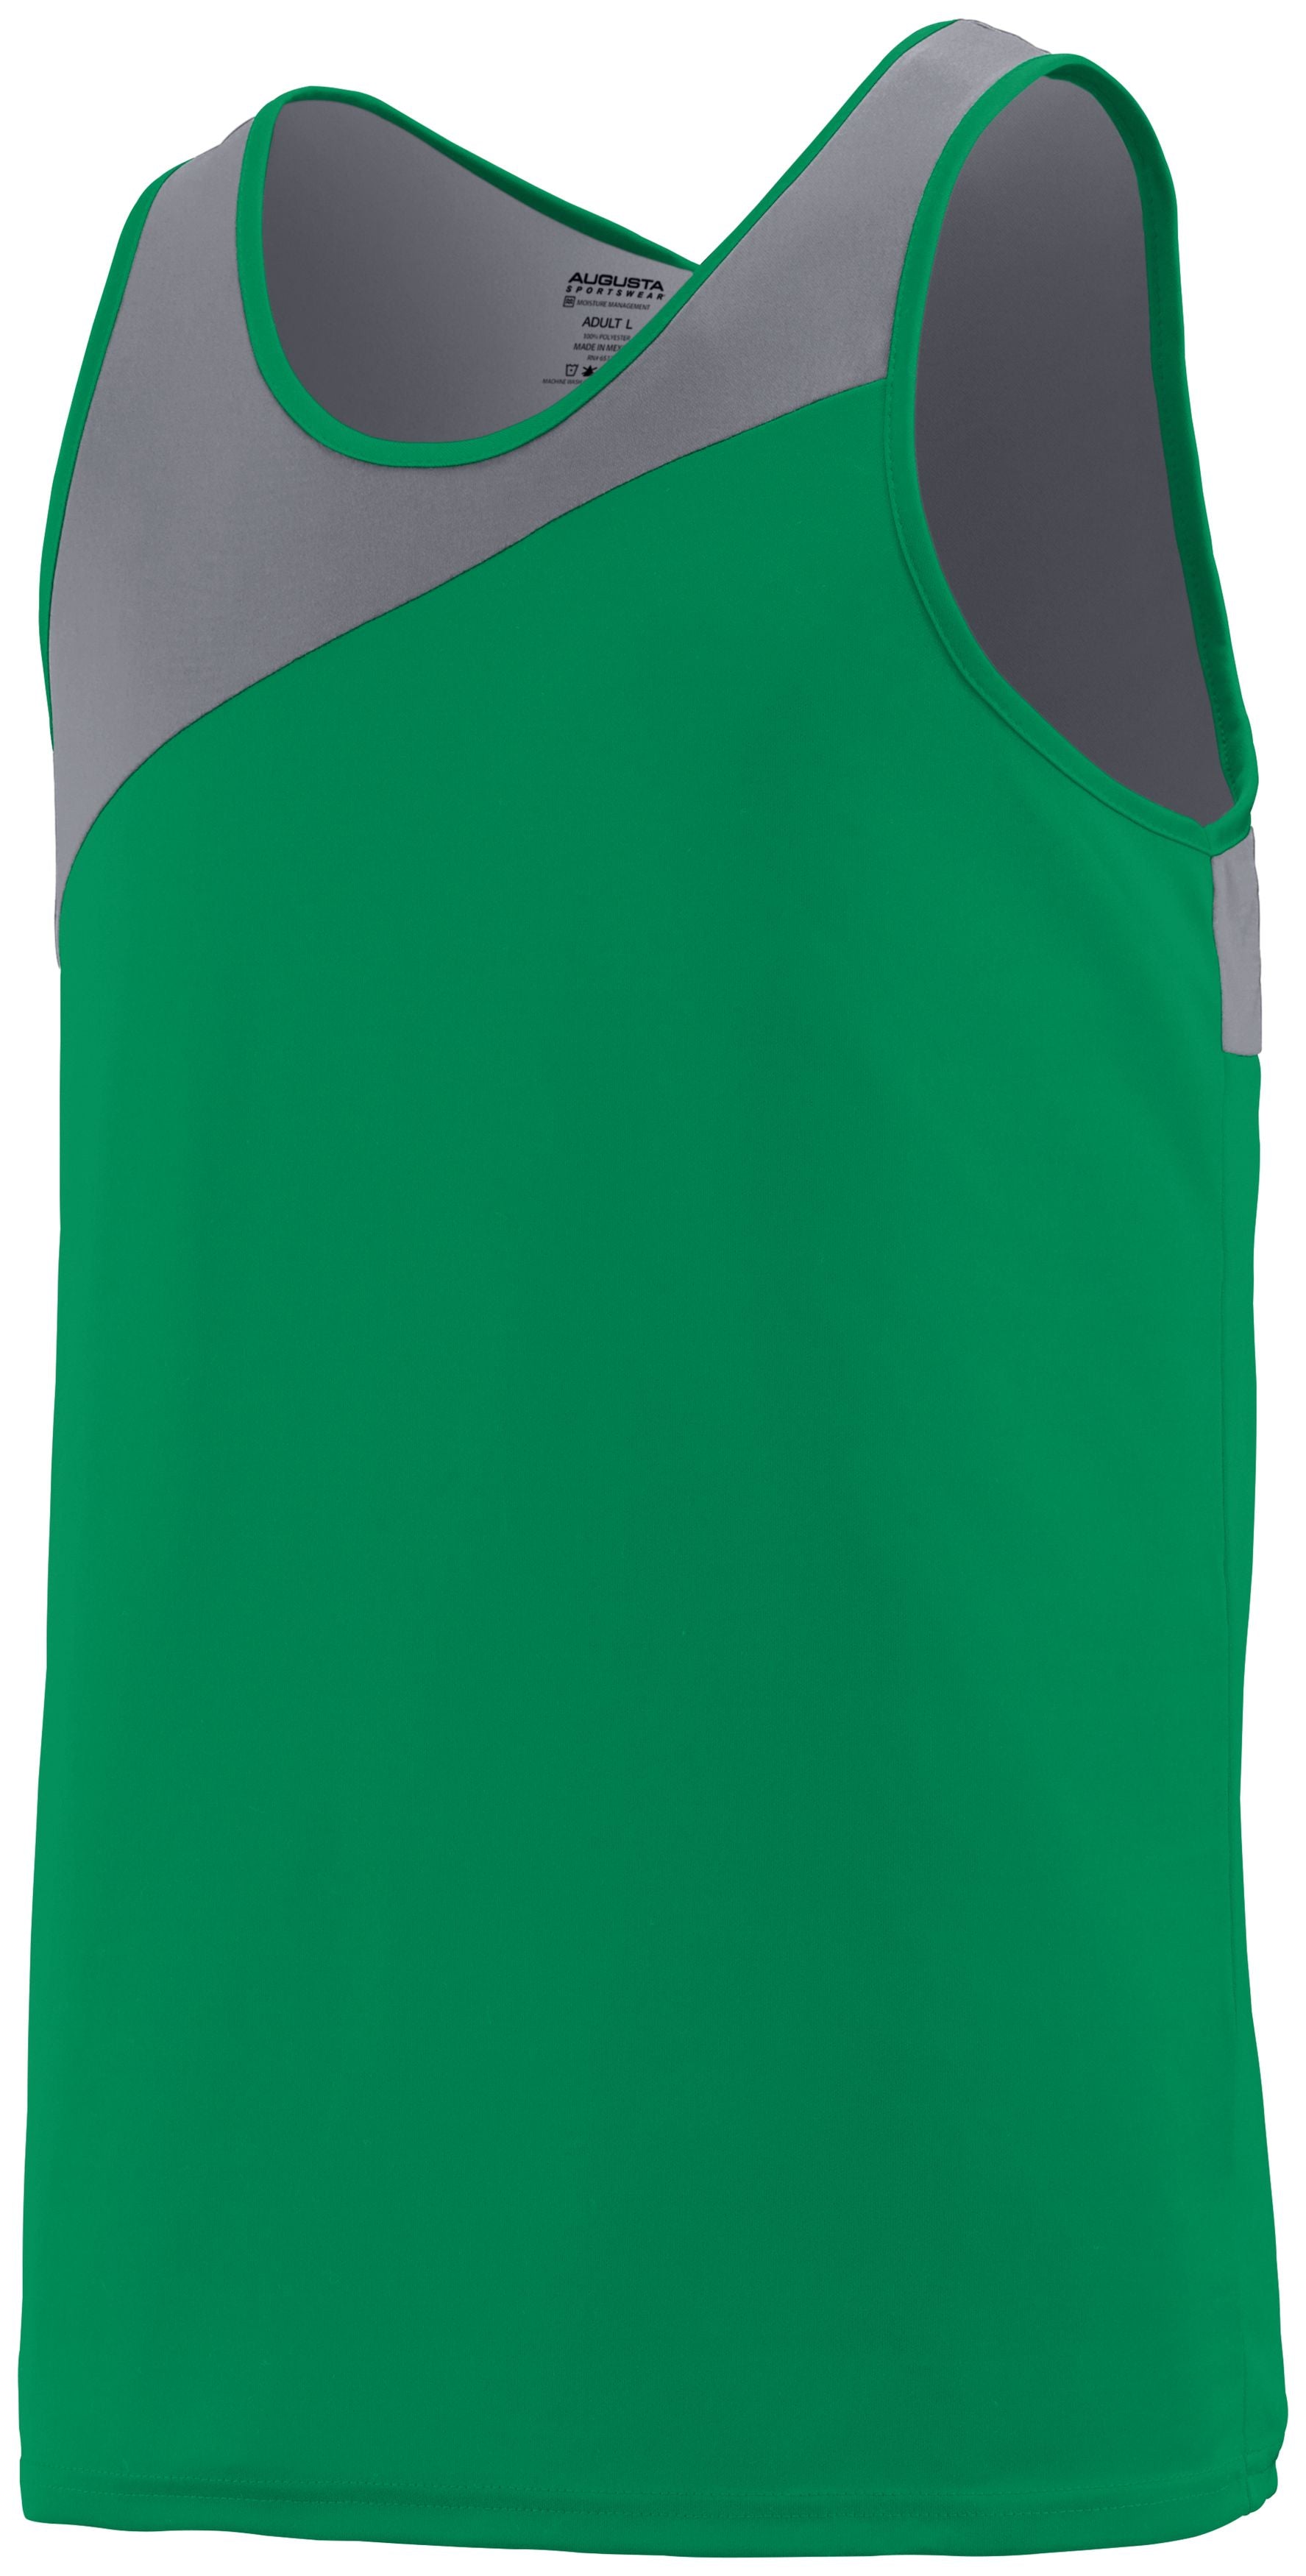 Augusta Sportswear Accelerate Jersey in Kelly/Graphite  -Part of the Adult, Adult-Jersey, Augusta-Products, Track-Field, Shirts product lines at KanaleyCreations.com